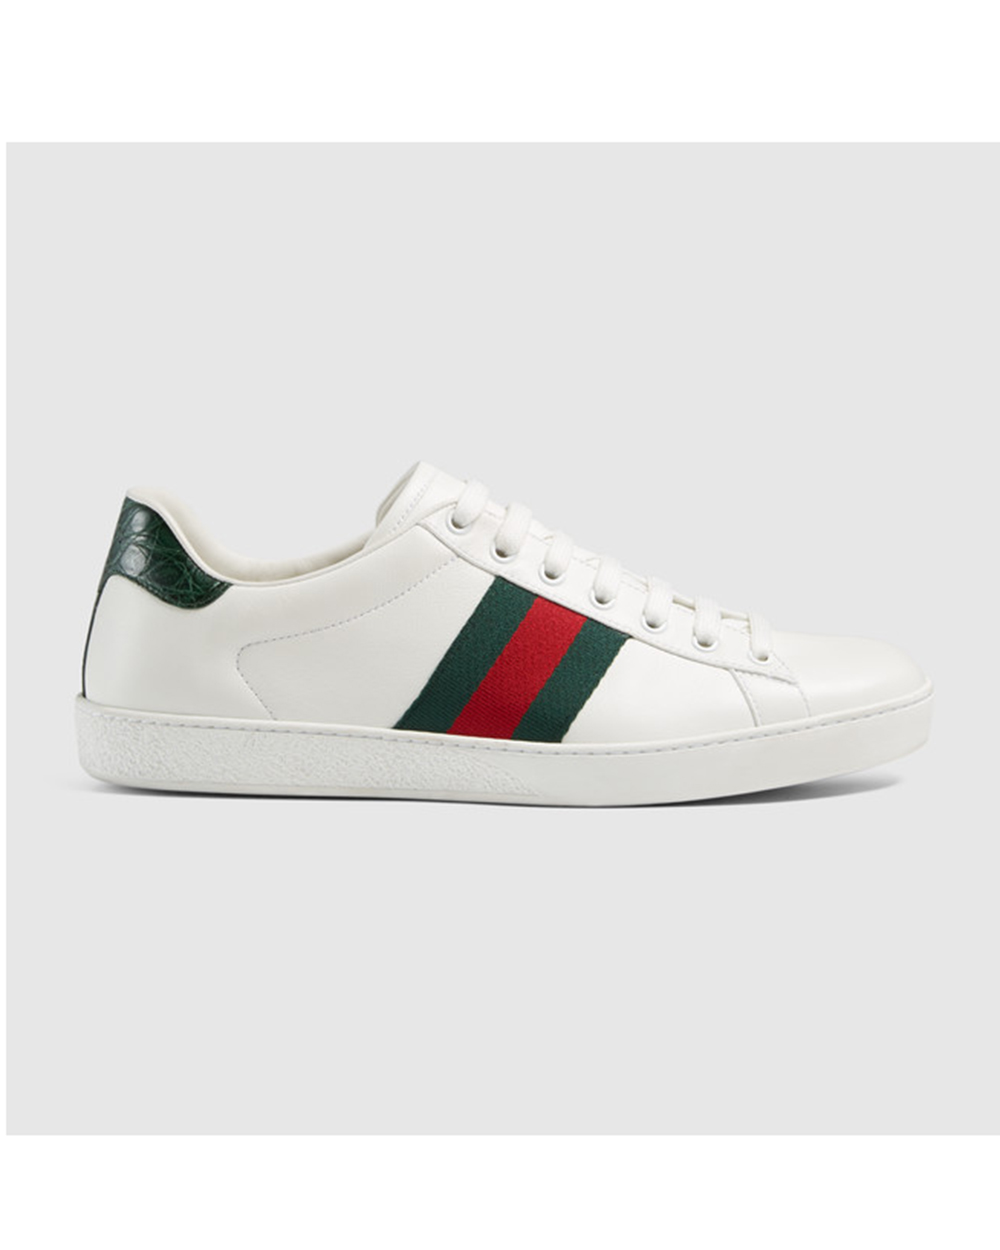 Sneaker, $500, from Gucci.